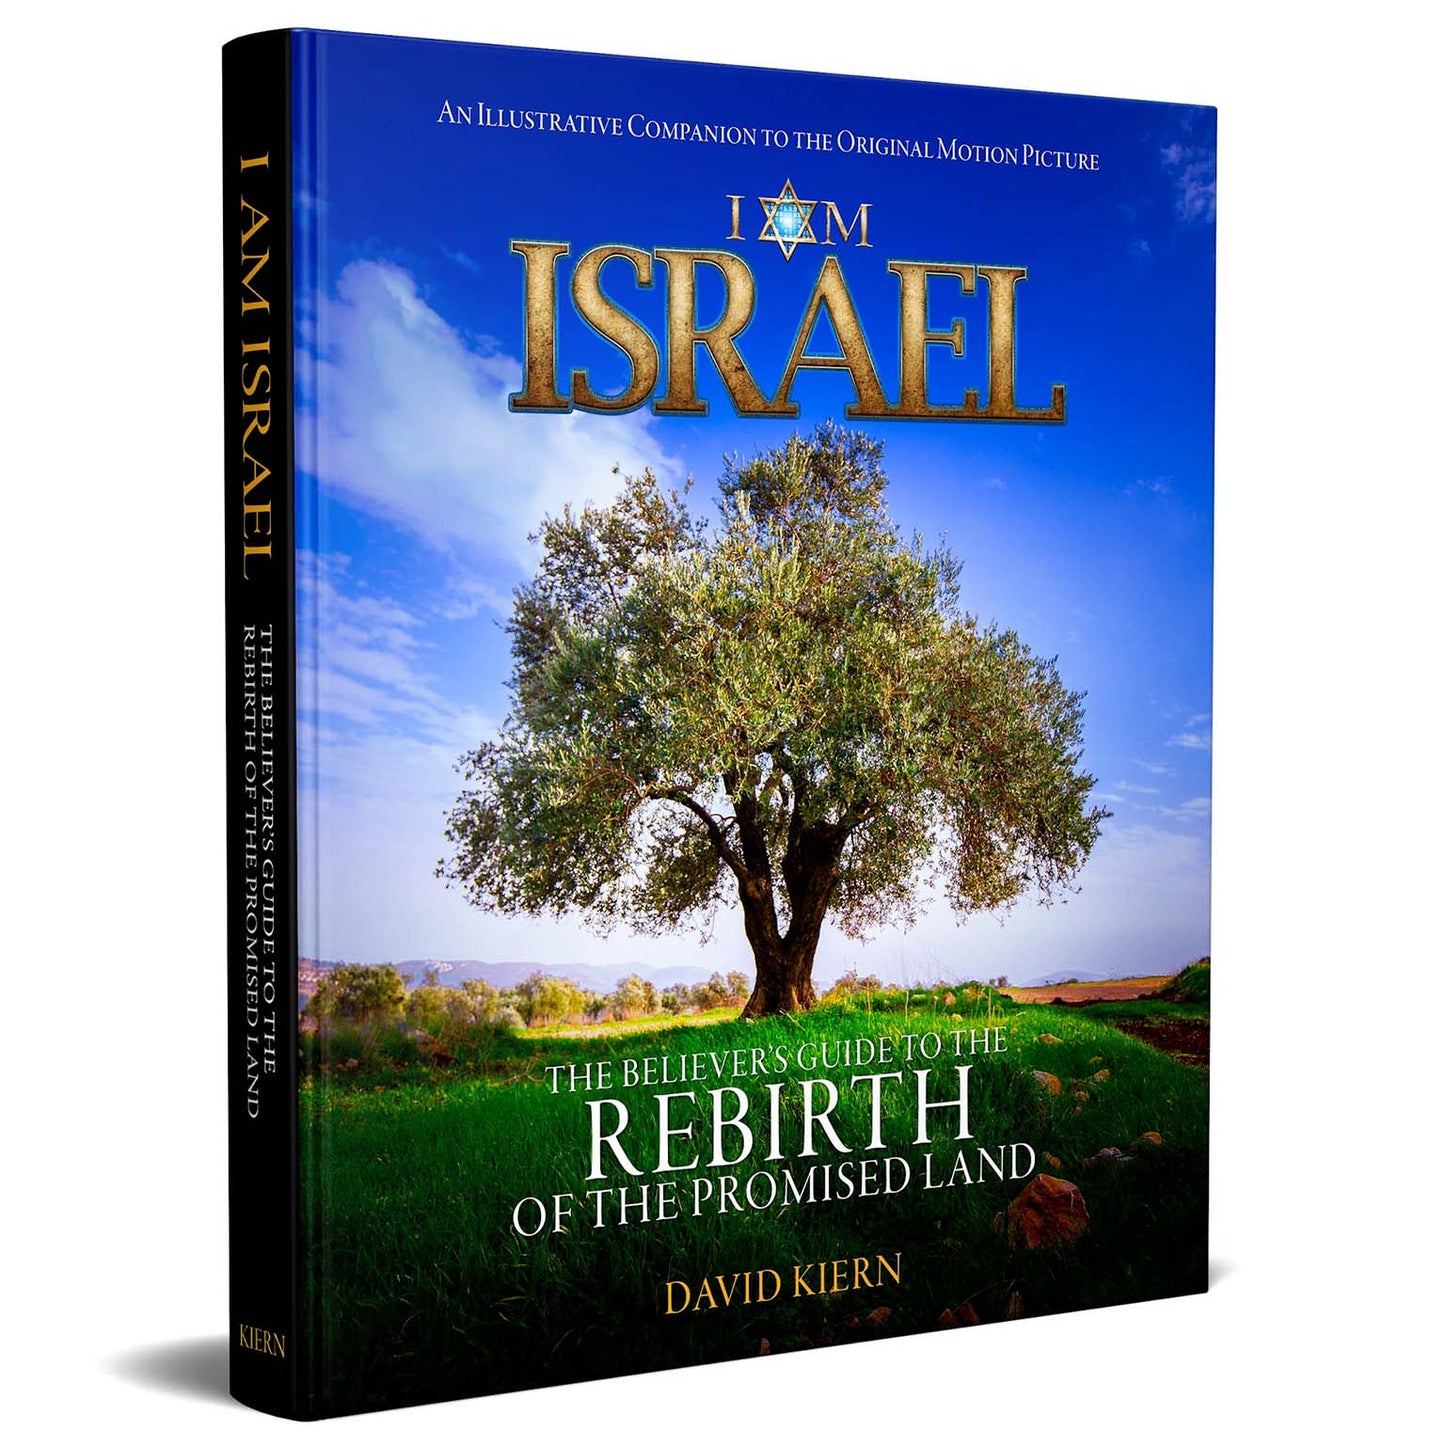 The Believer's Guide to the Rebirth of the Promised Land - Hardcover Coffee Table Book